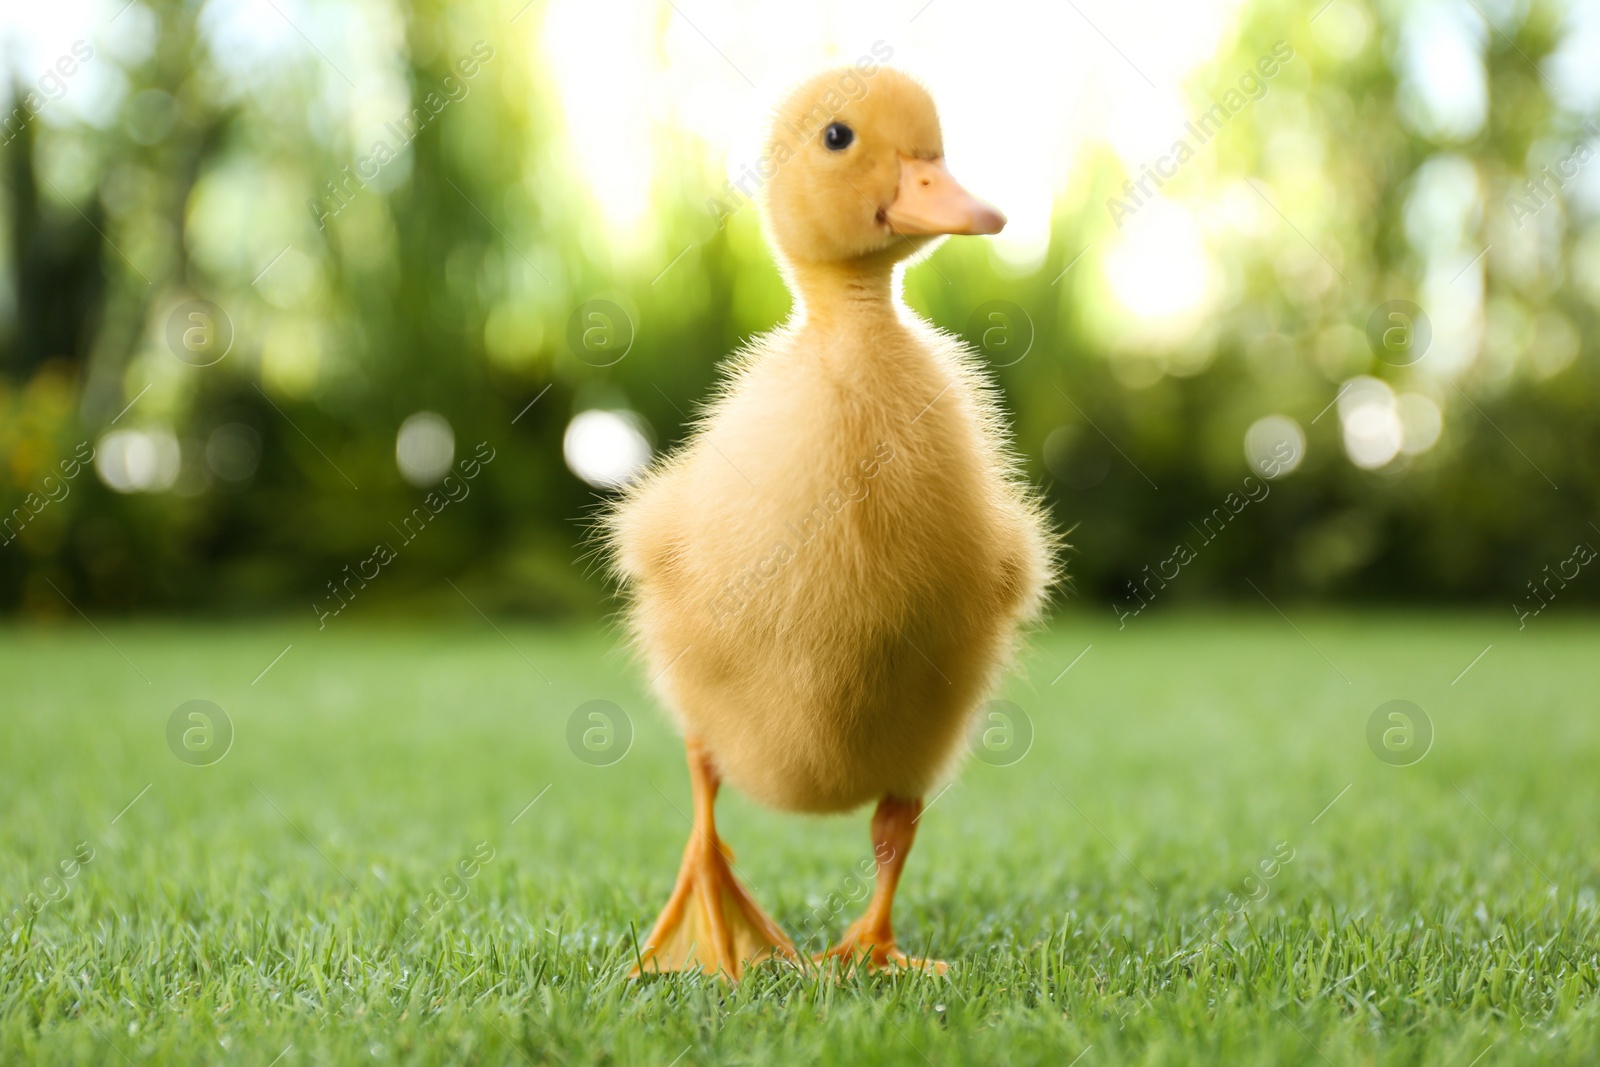 Photo of Cute fluffy baby duckling on green grass outdoors